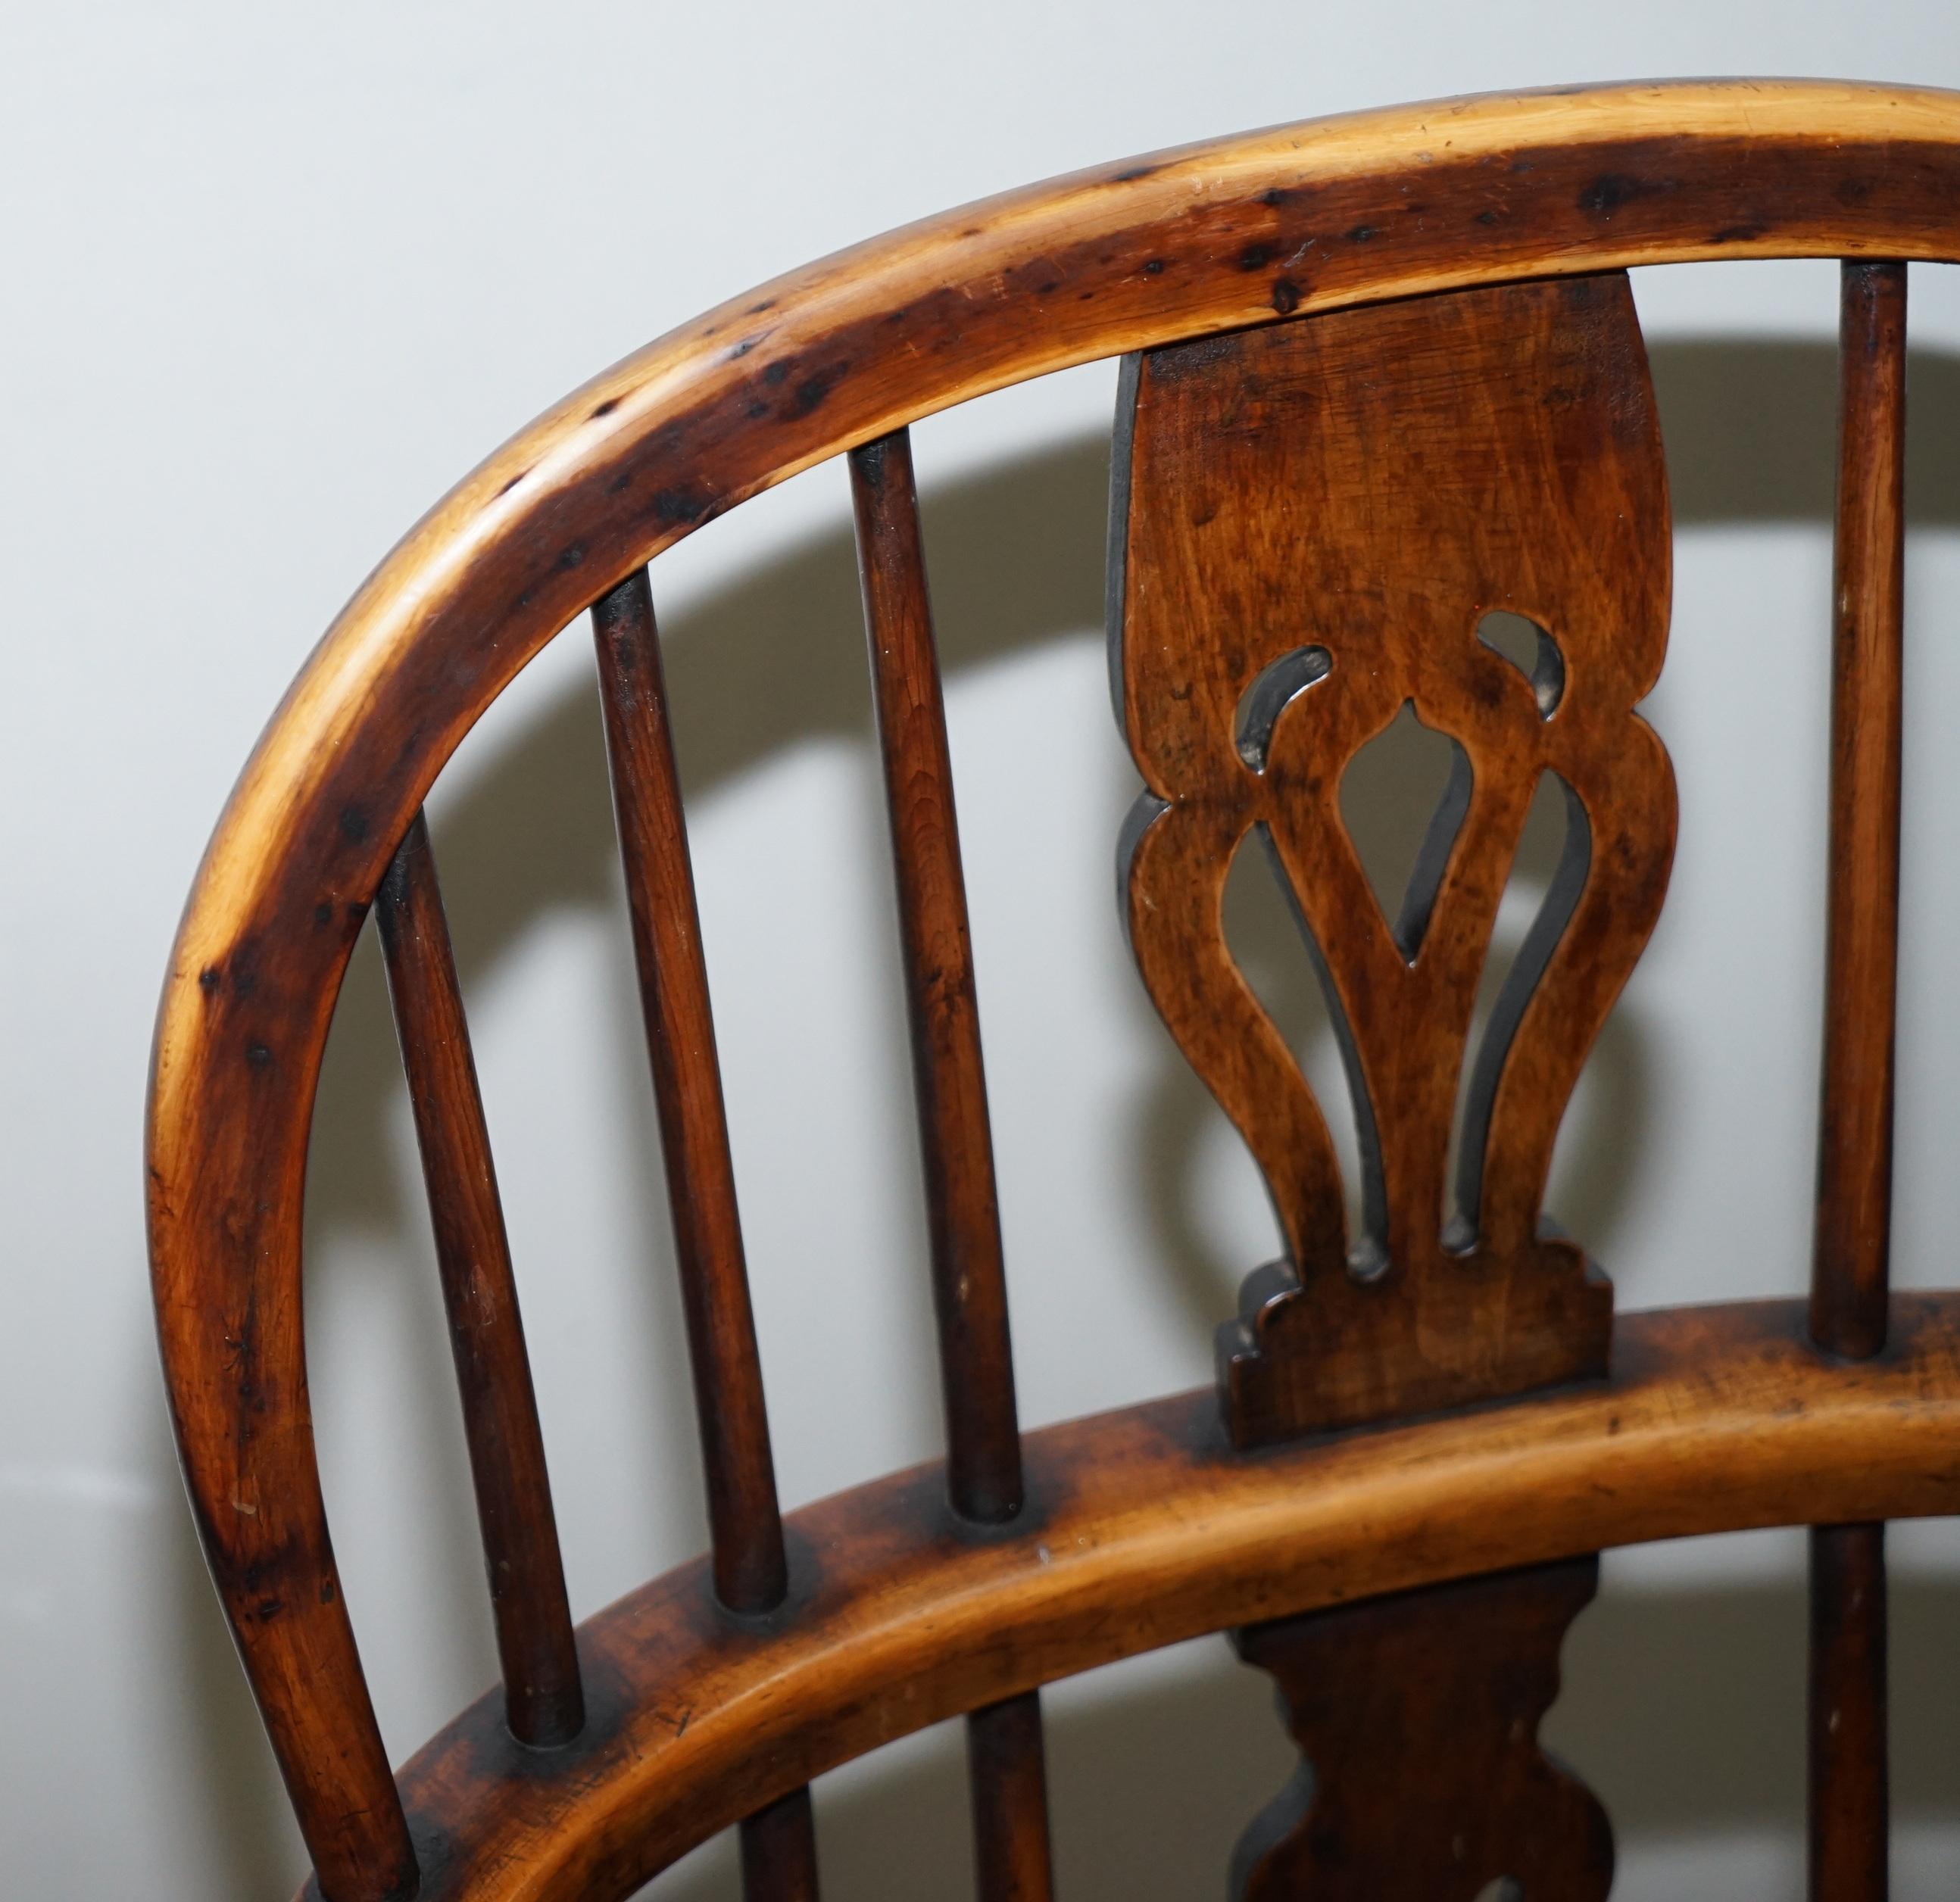 Pair of Burr Yew Wood and Elm Windsor Armchairs circa 1860 English Country House For Sale 10